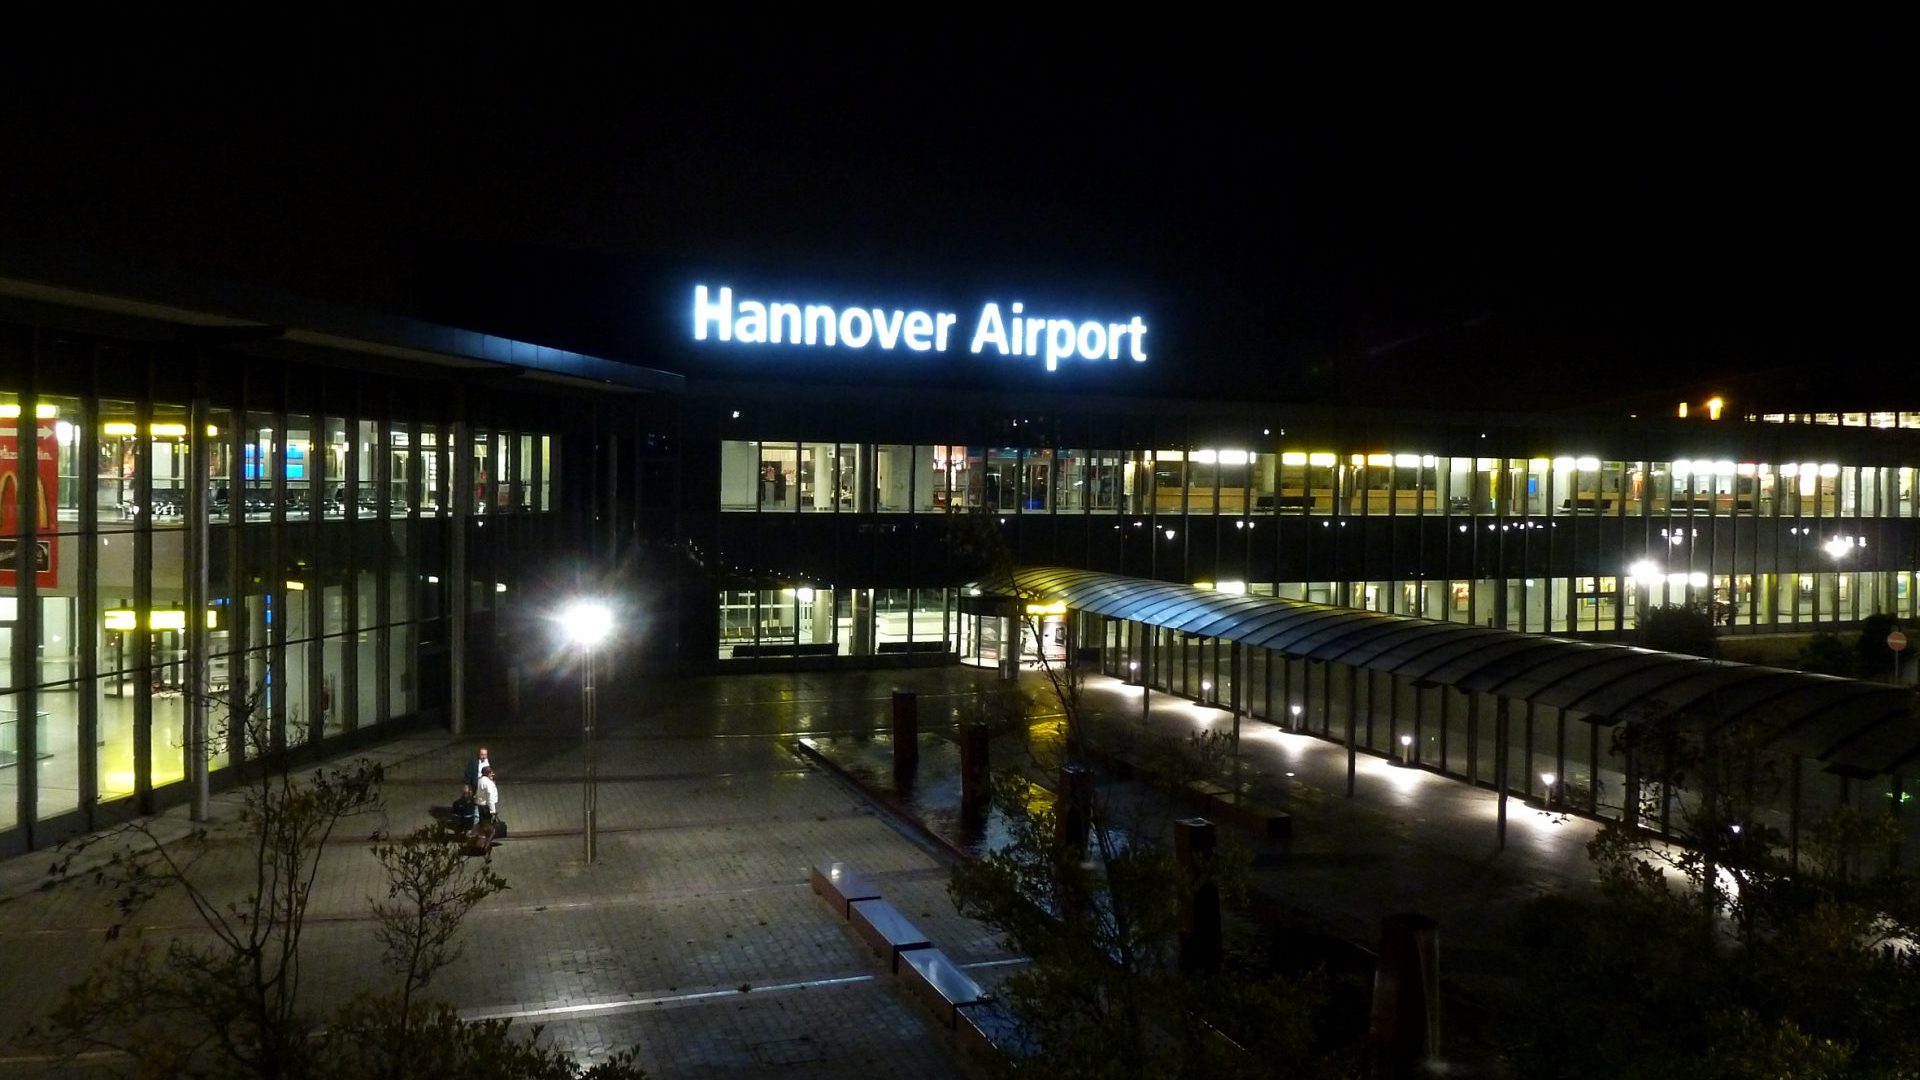 Hannover Airport halts flight operations following security incident